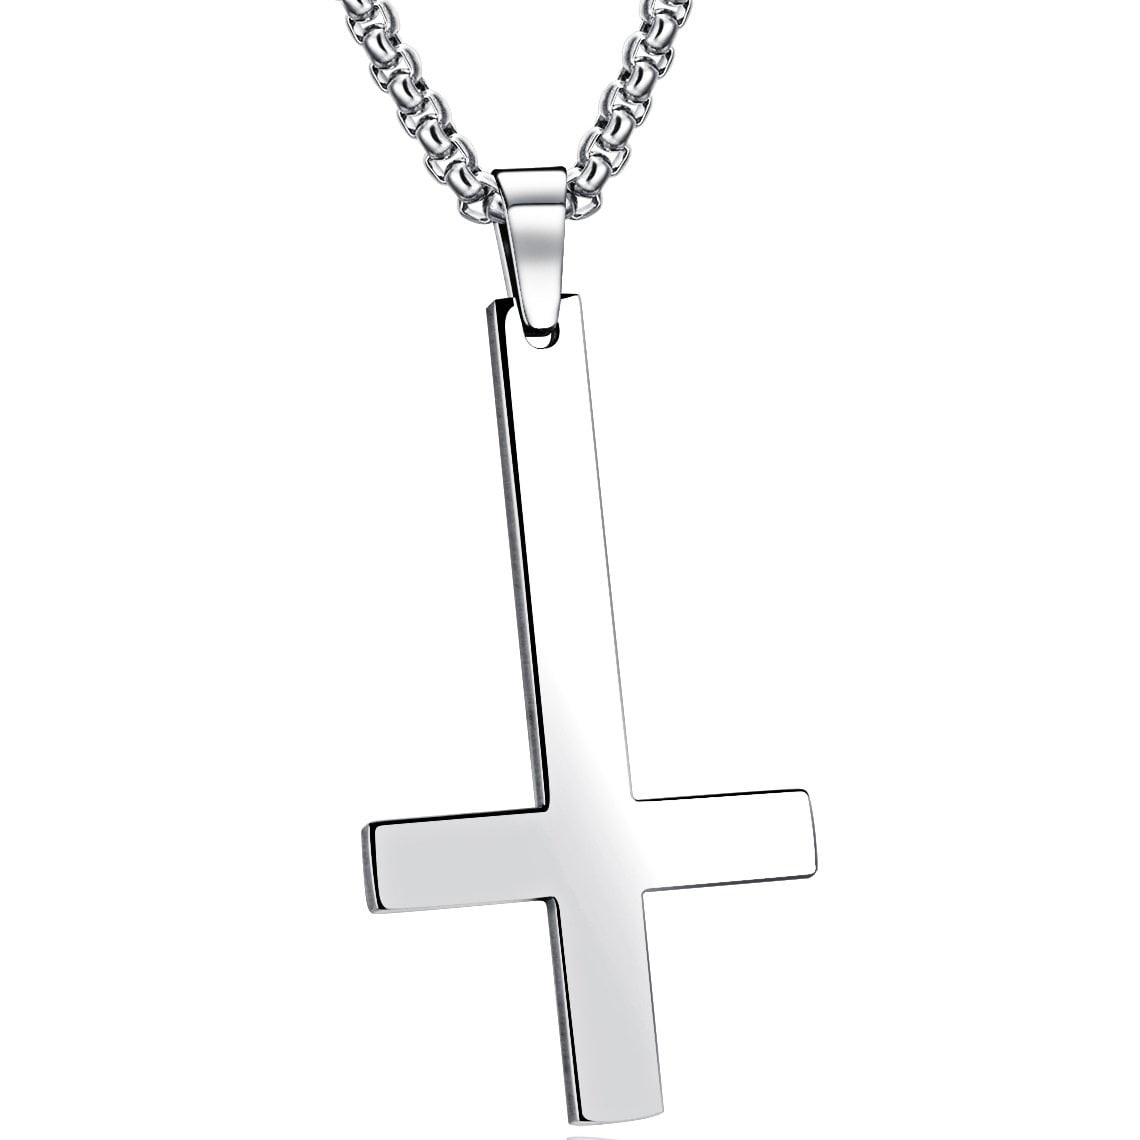 Buy St. Peter Inverted Upside Down Gothic Cross Pewter Pendant Charm Amulet  Black W Stainless Steel Chain at